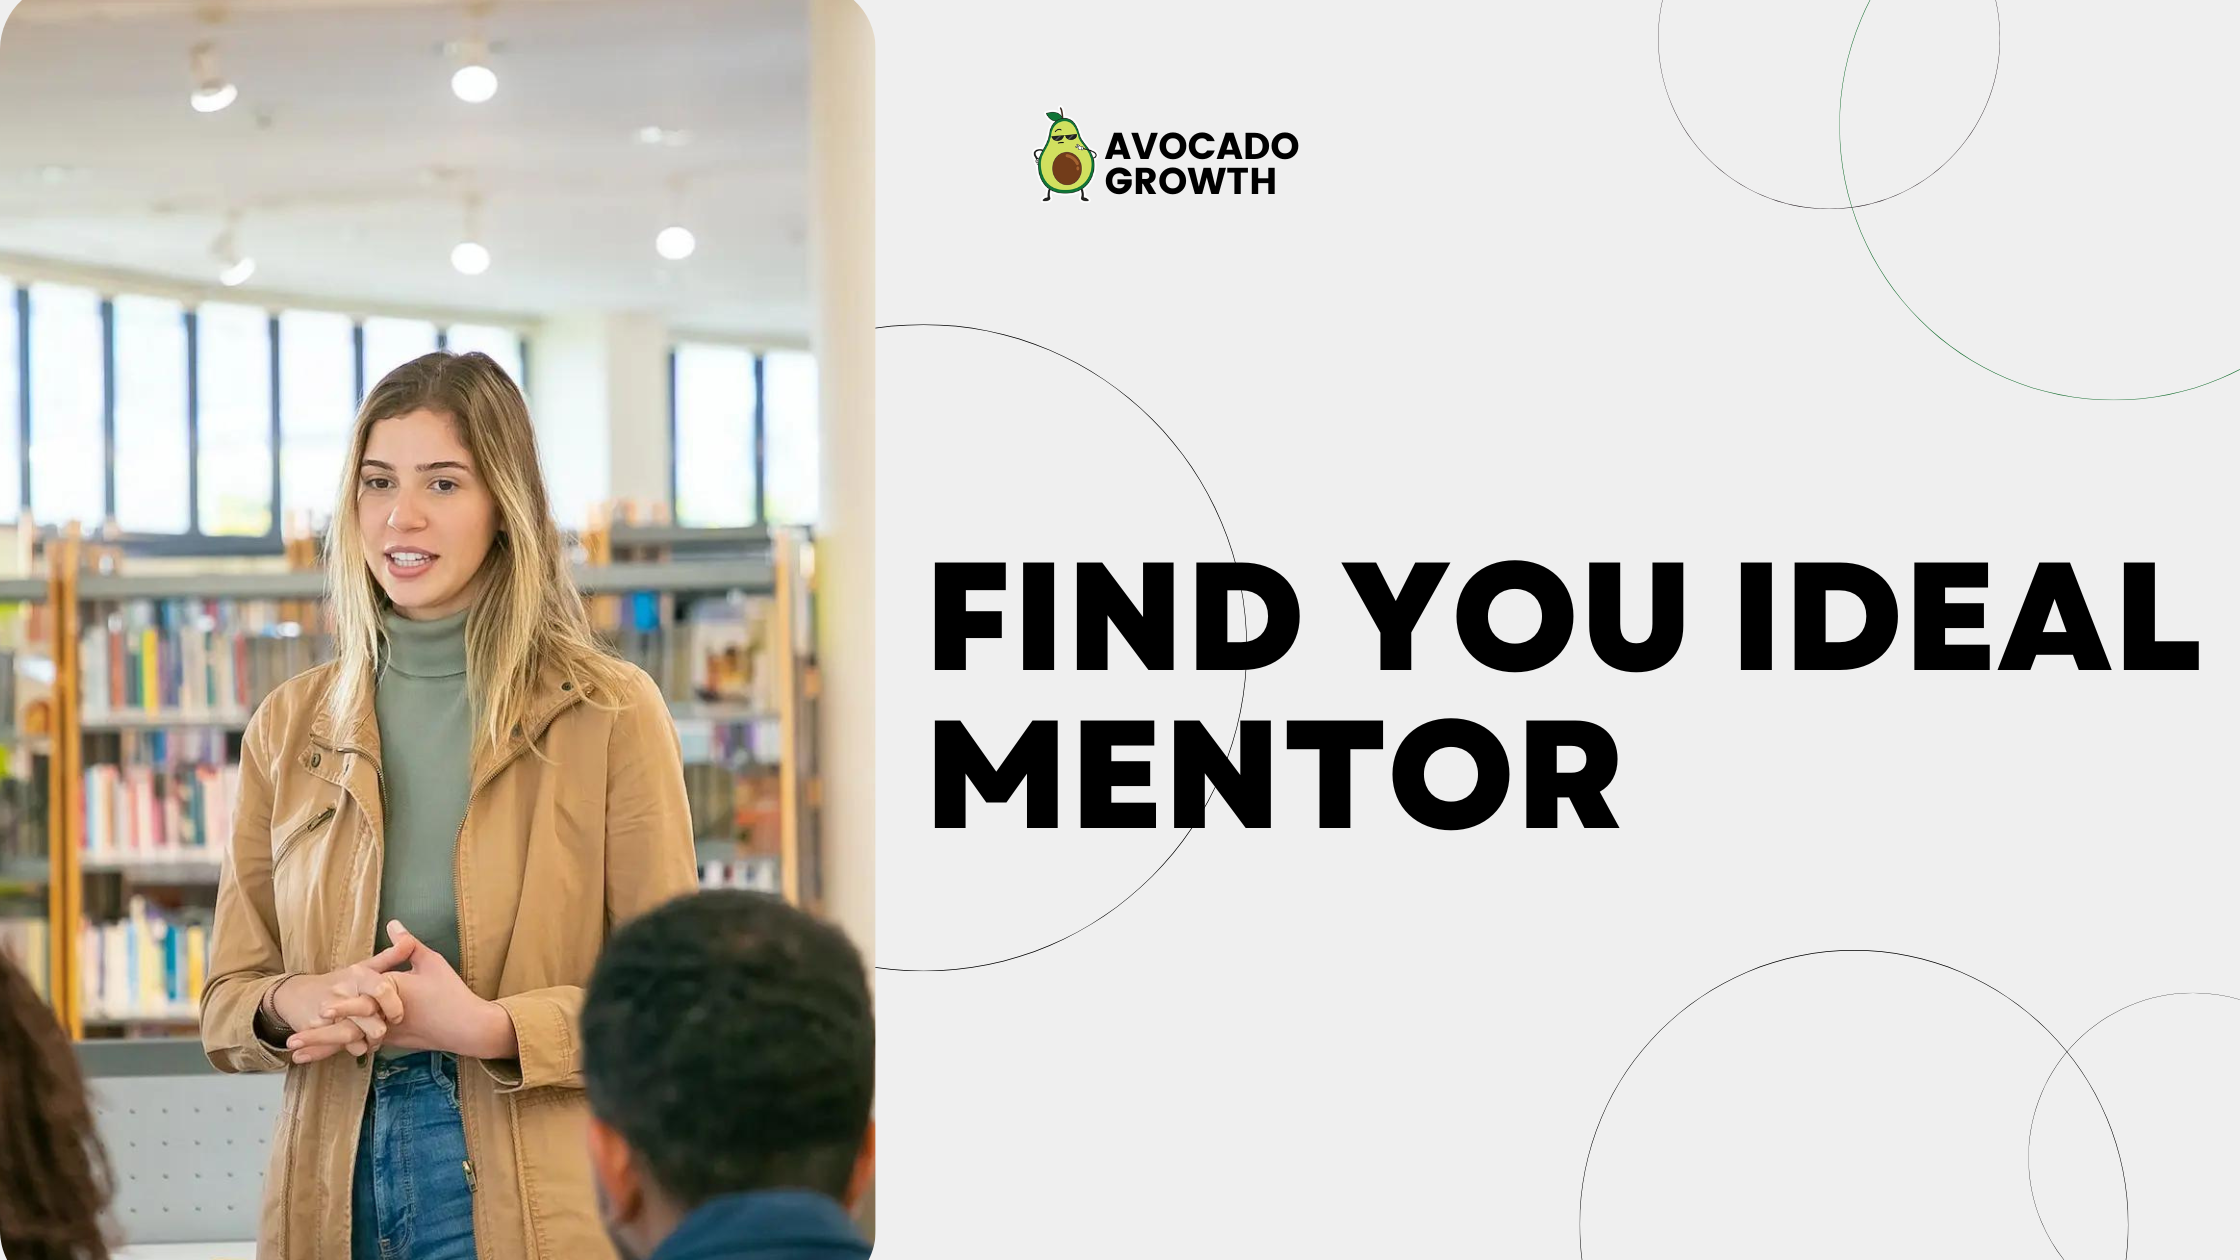 Cover Image for How to find your ideal mentor and accelerate your growth.